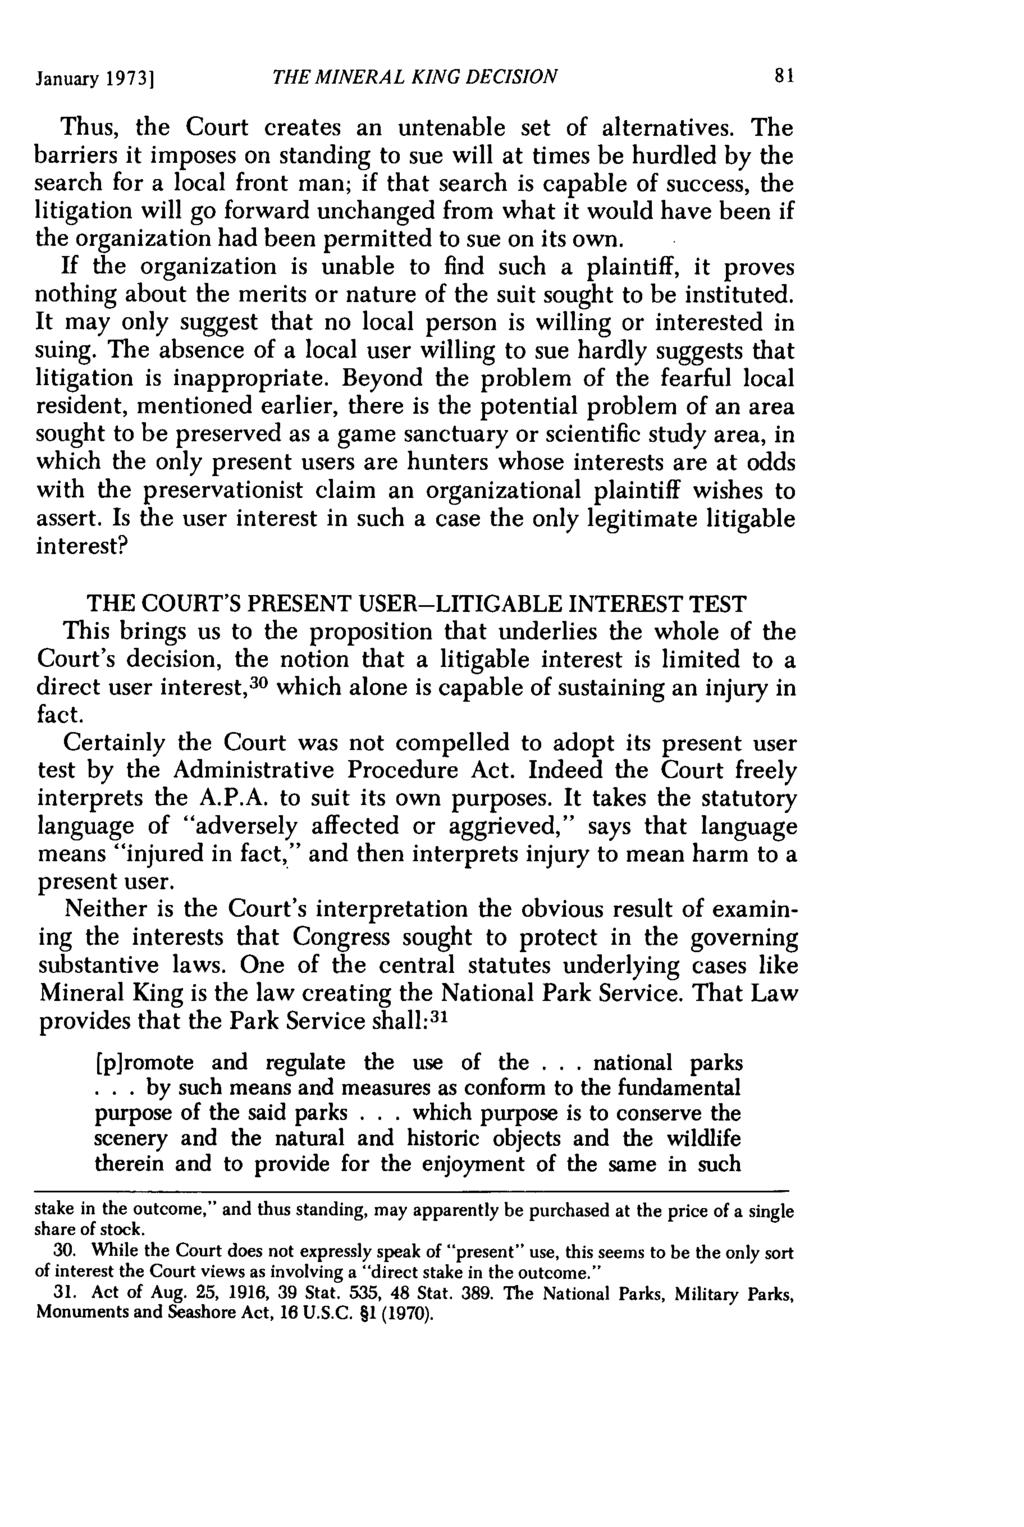 January 19731 THE MINERAL KING DECISION Thus, the Court creates an untenable set of alternatives.